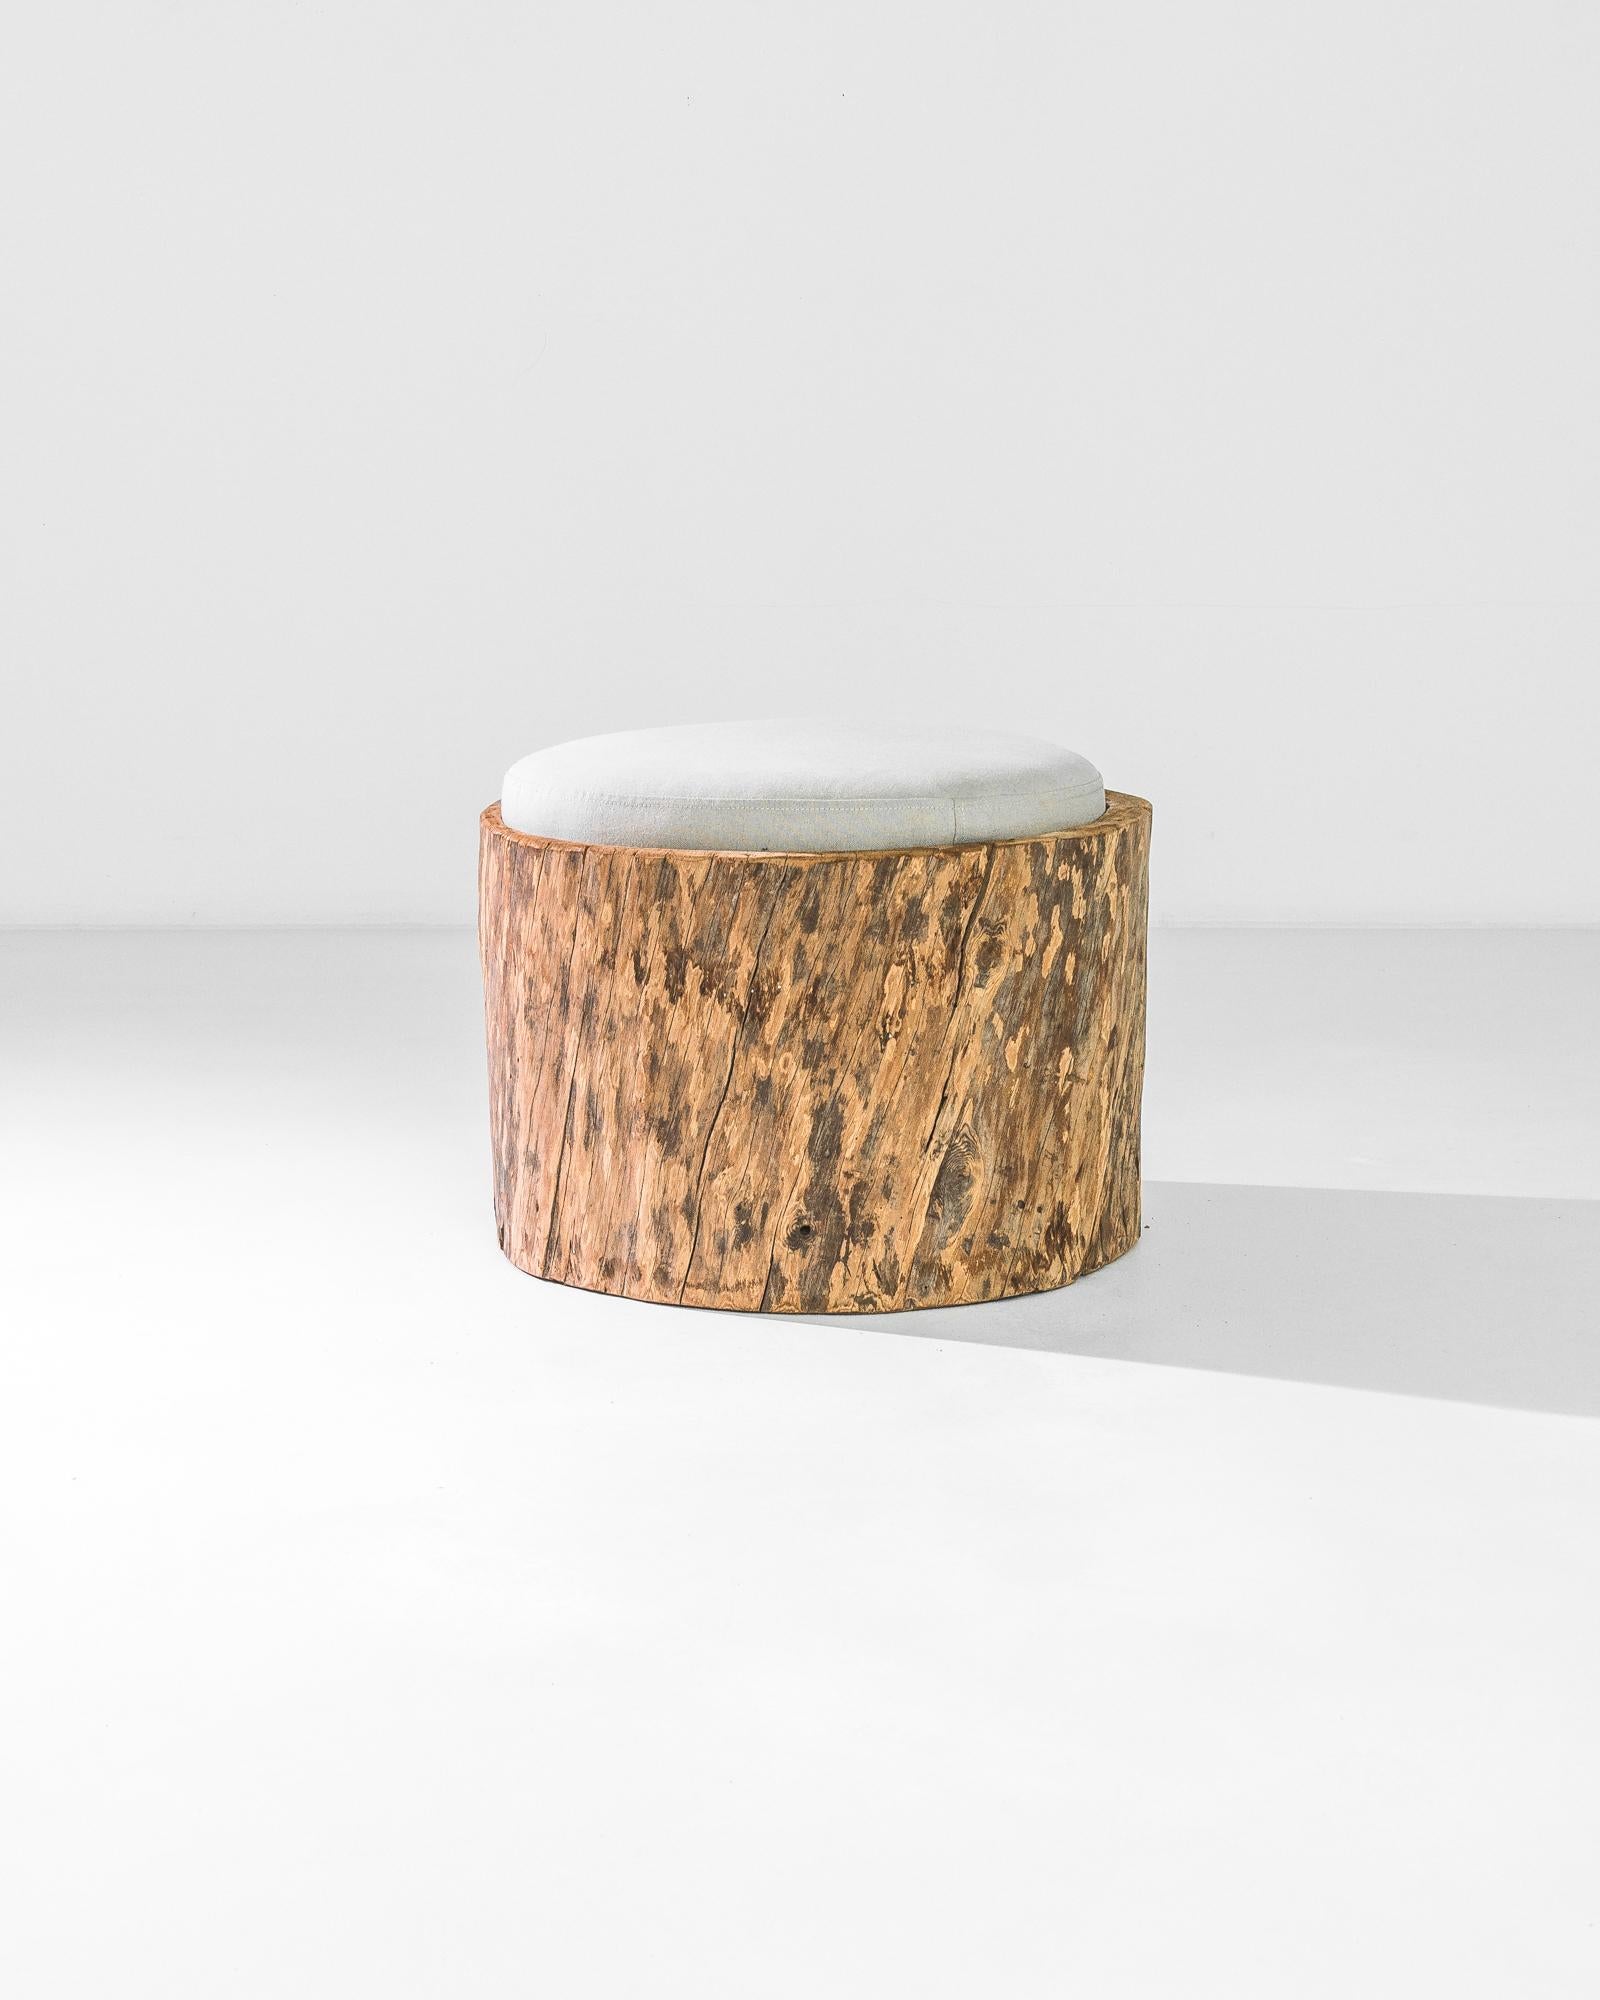 Carved out of a tree trunk circa 1800 and freshly upholstered, this original Polish pouf - is modern and rustic, a fresh combination of new and antique. The coarse texture of the wood is accompanied by softness. A newly upholstered fabric cushion,